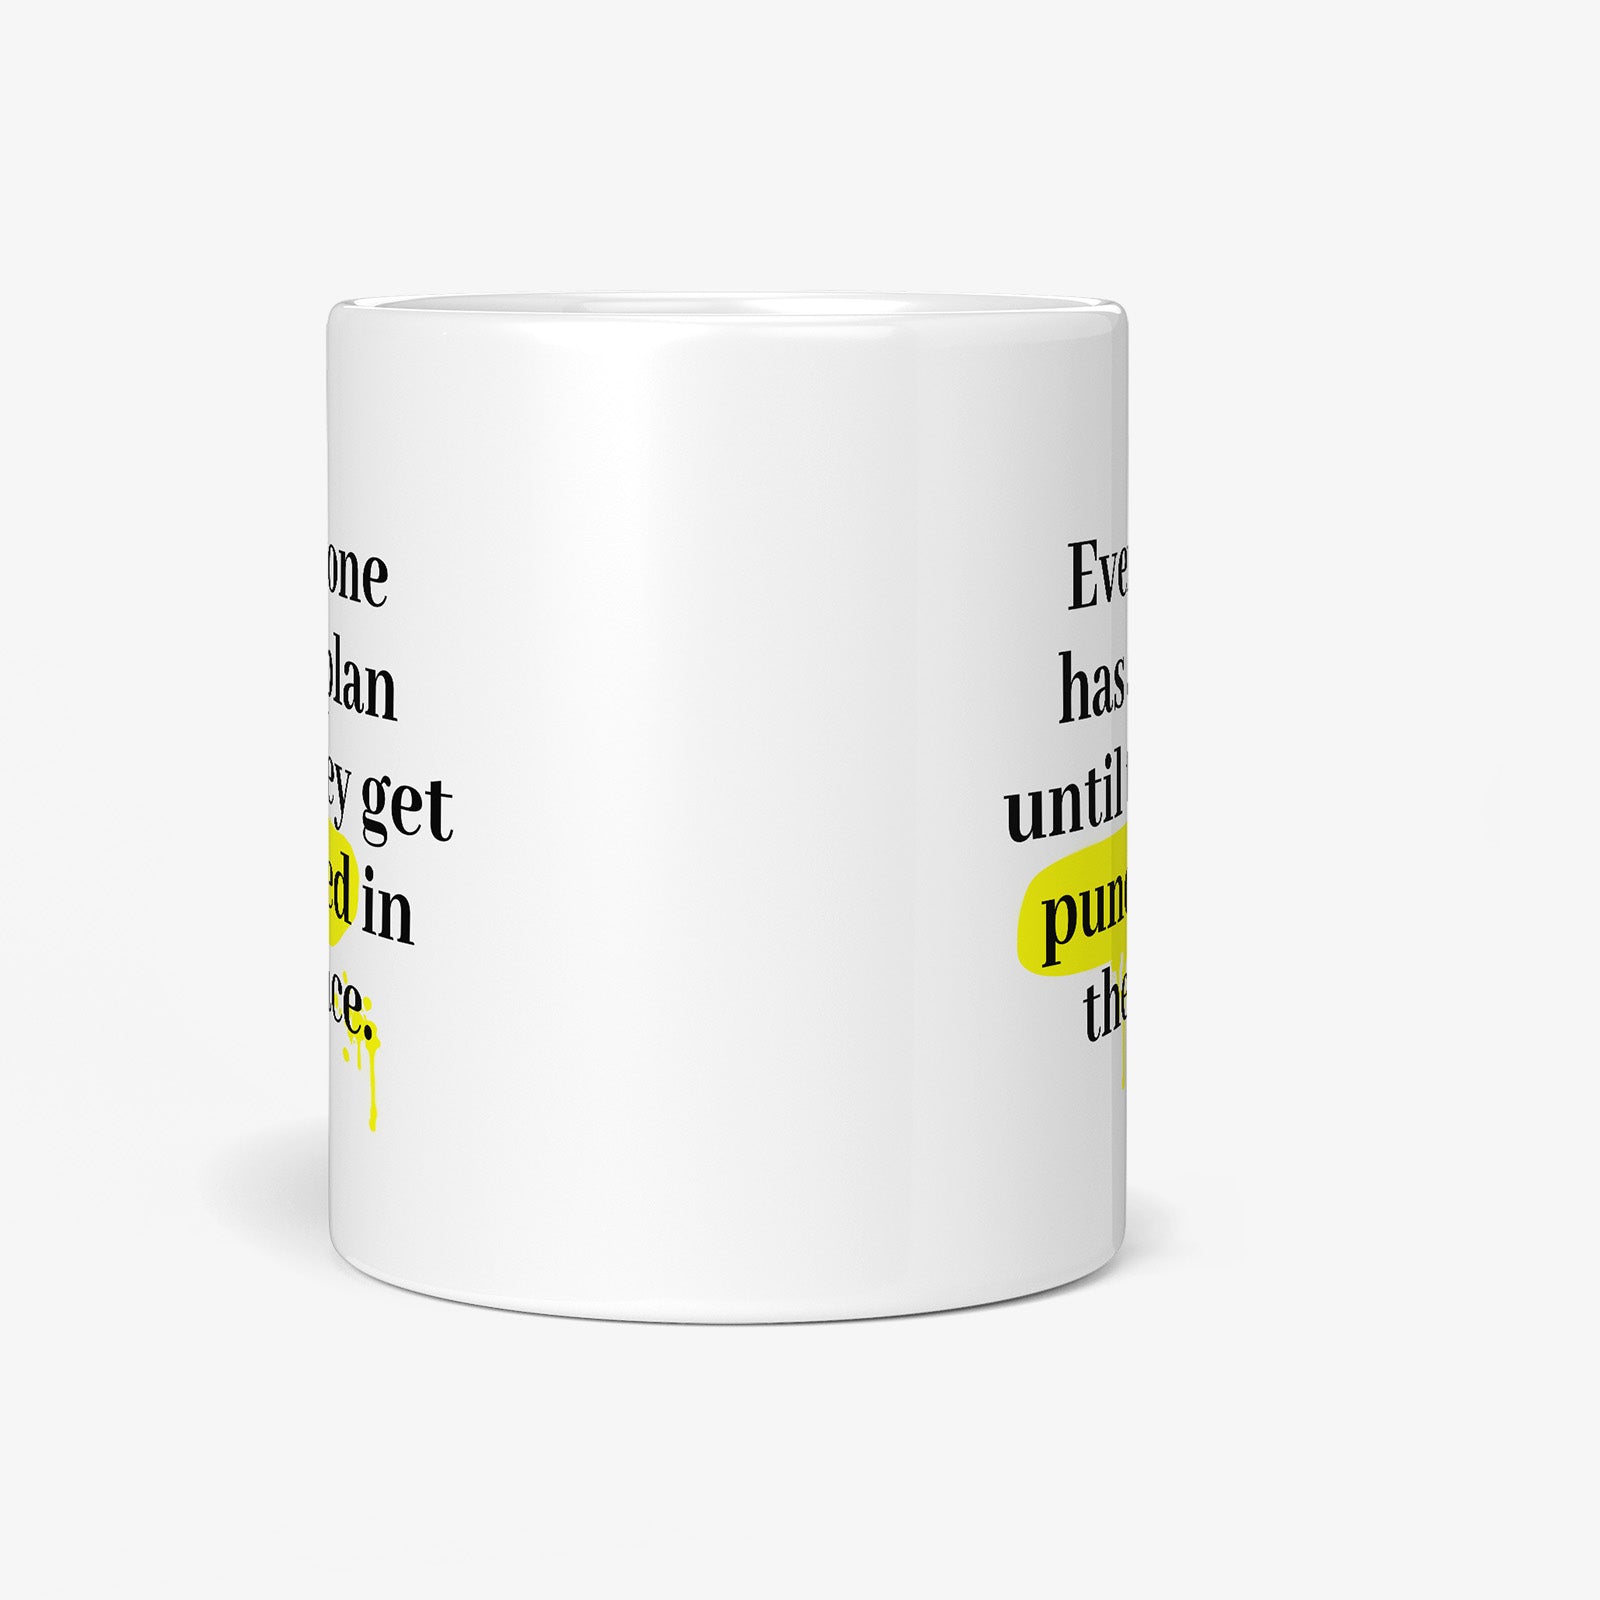 Be inspired by Mike Tyson's famous quote, "Everyone has a plan until they get punched in the face" on this white and glossy 11oz coffee mug with a front view.